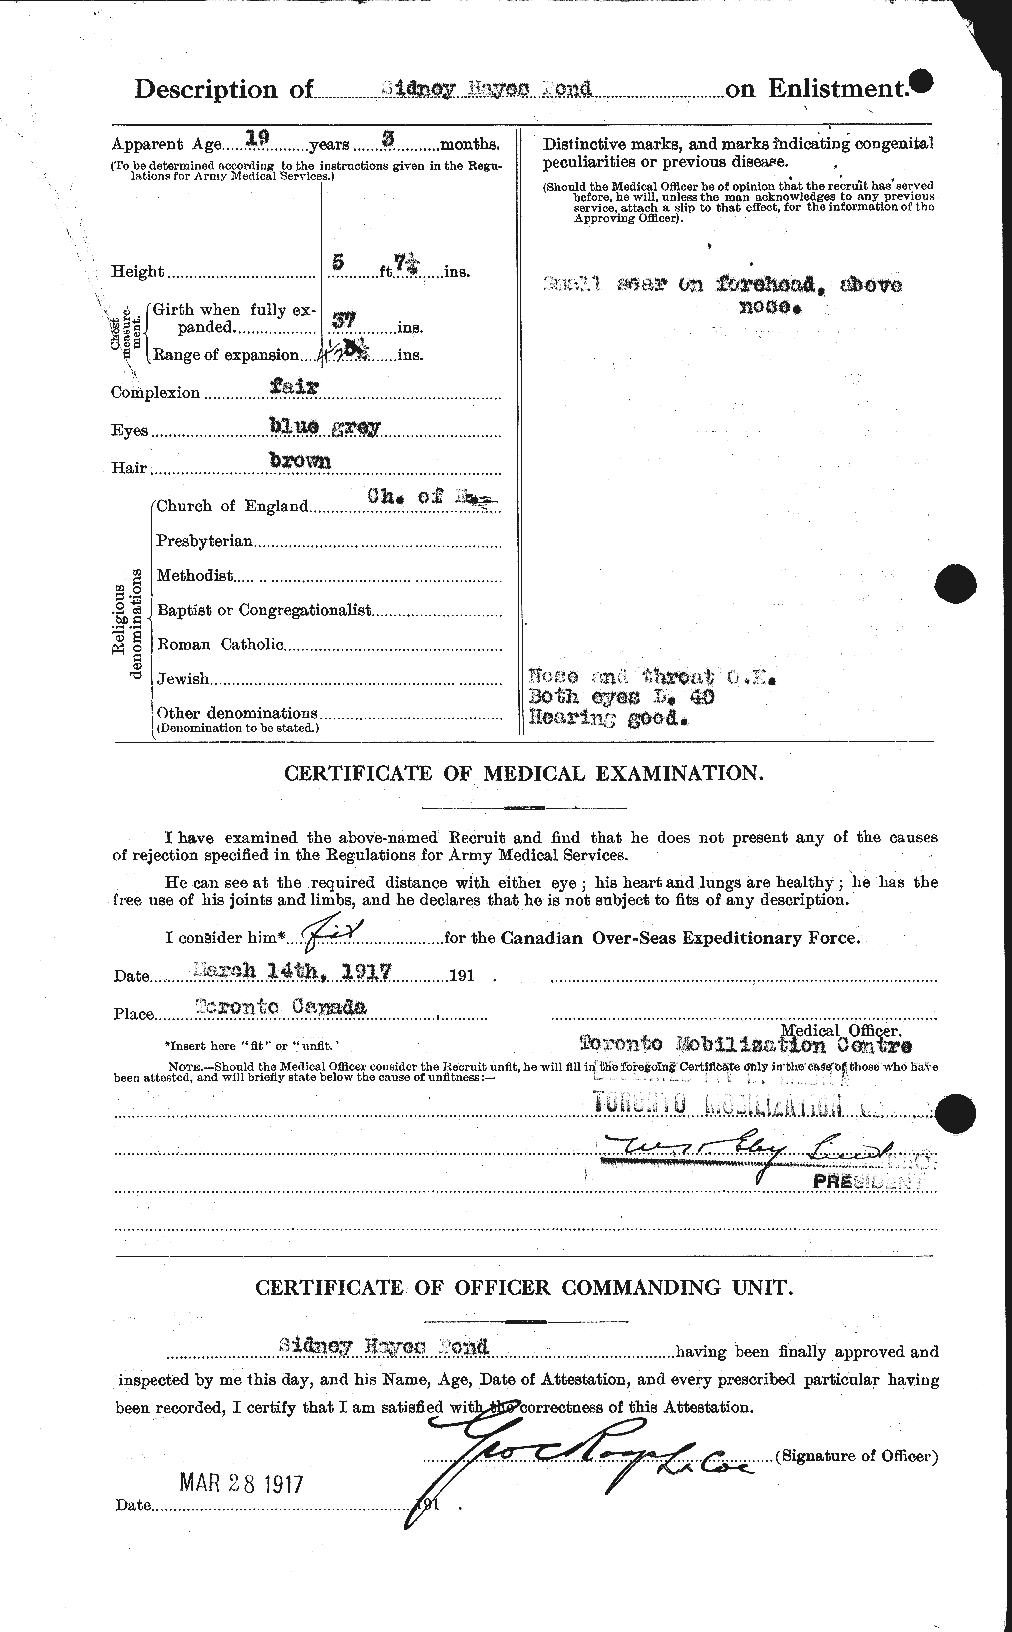 Personnel Records of the First World War - CEF 581118b